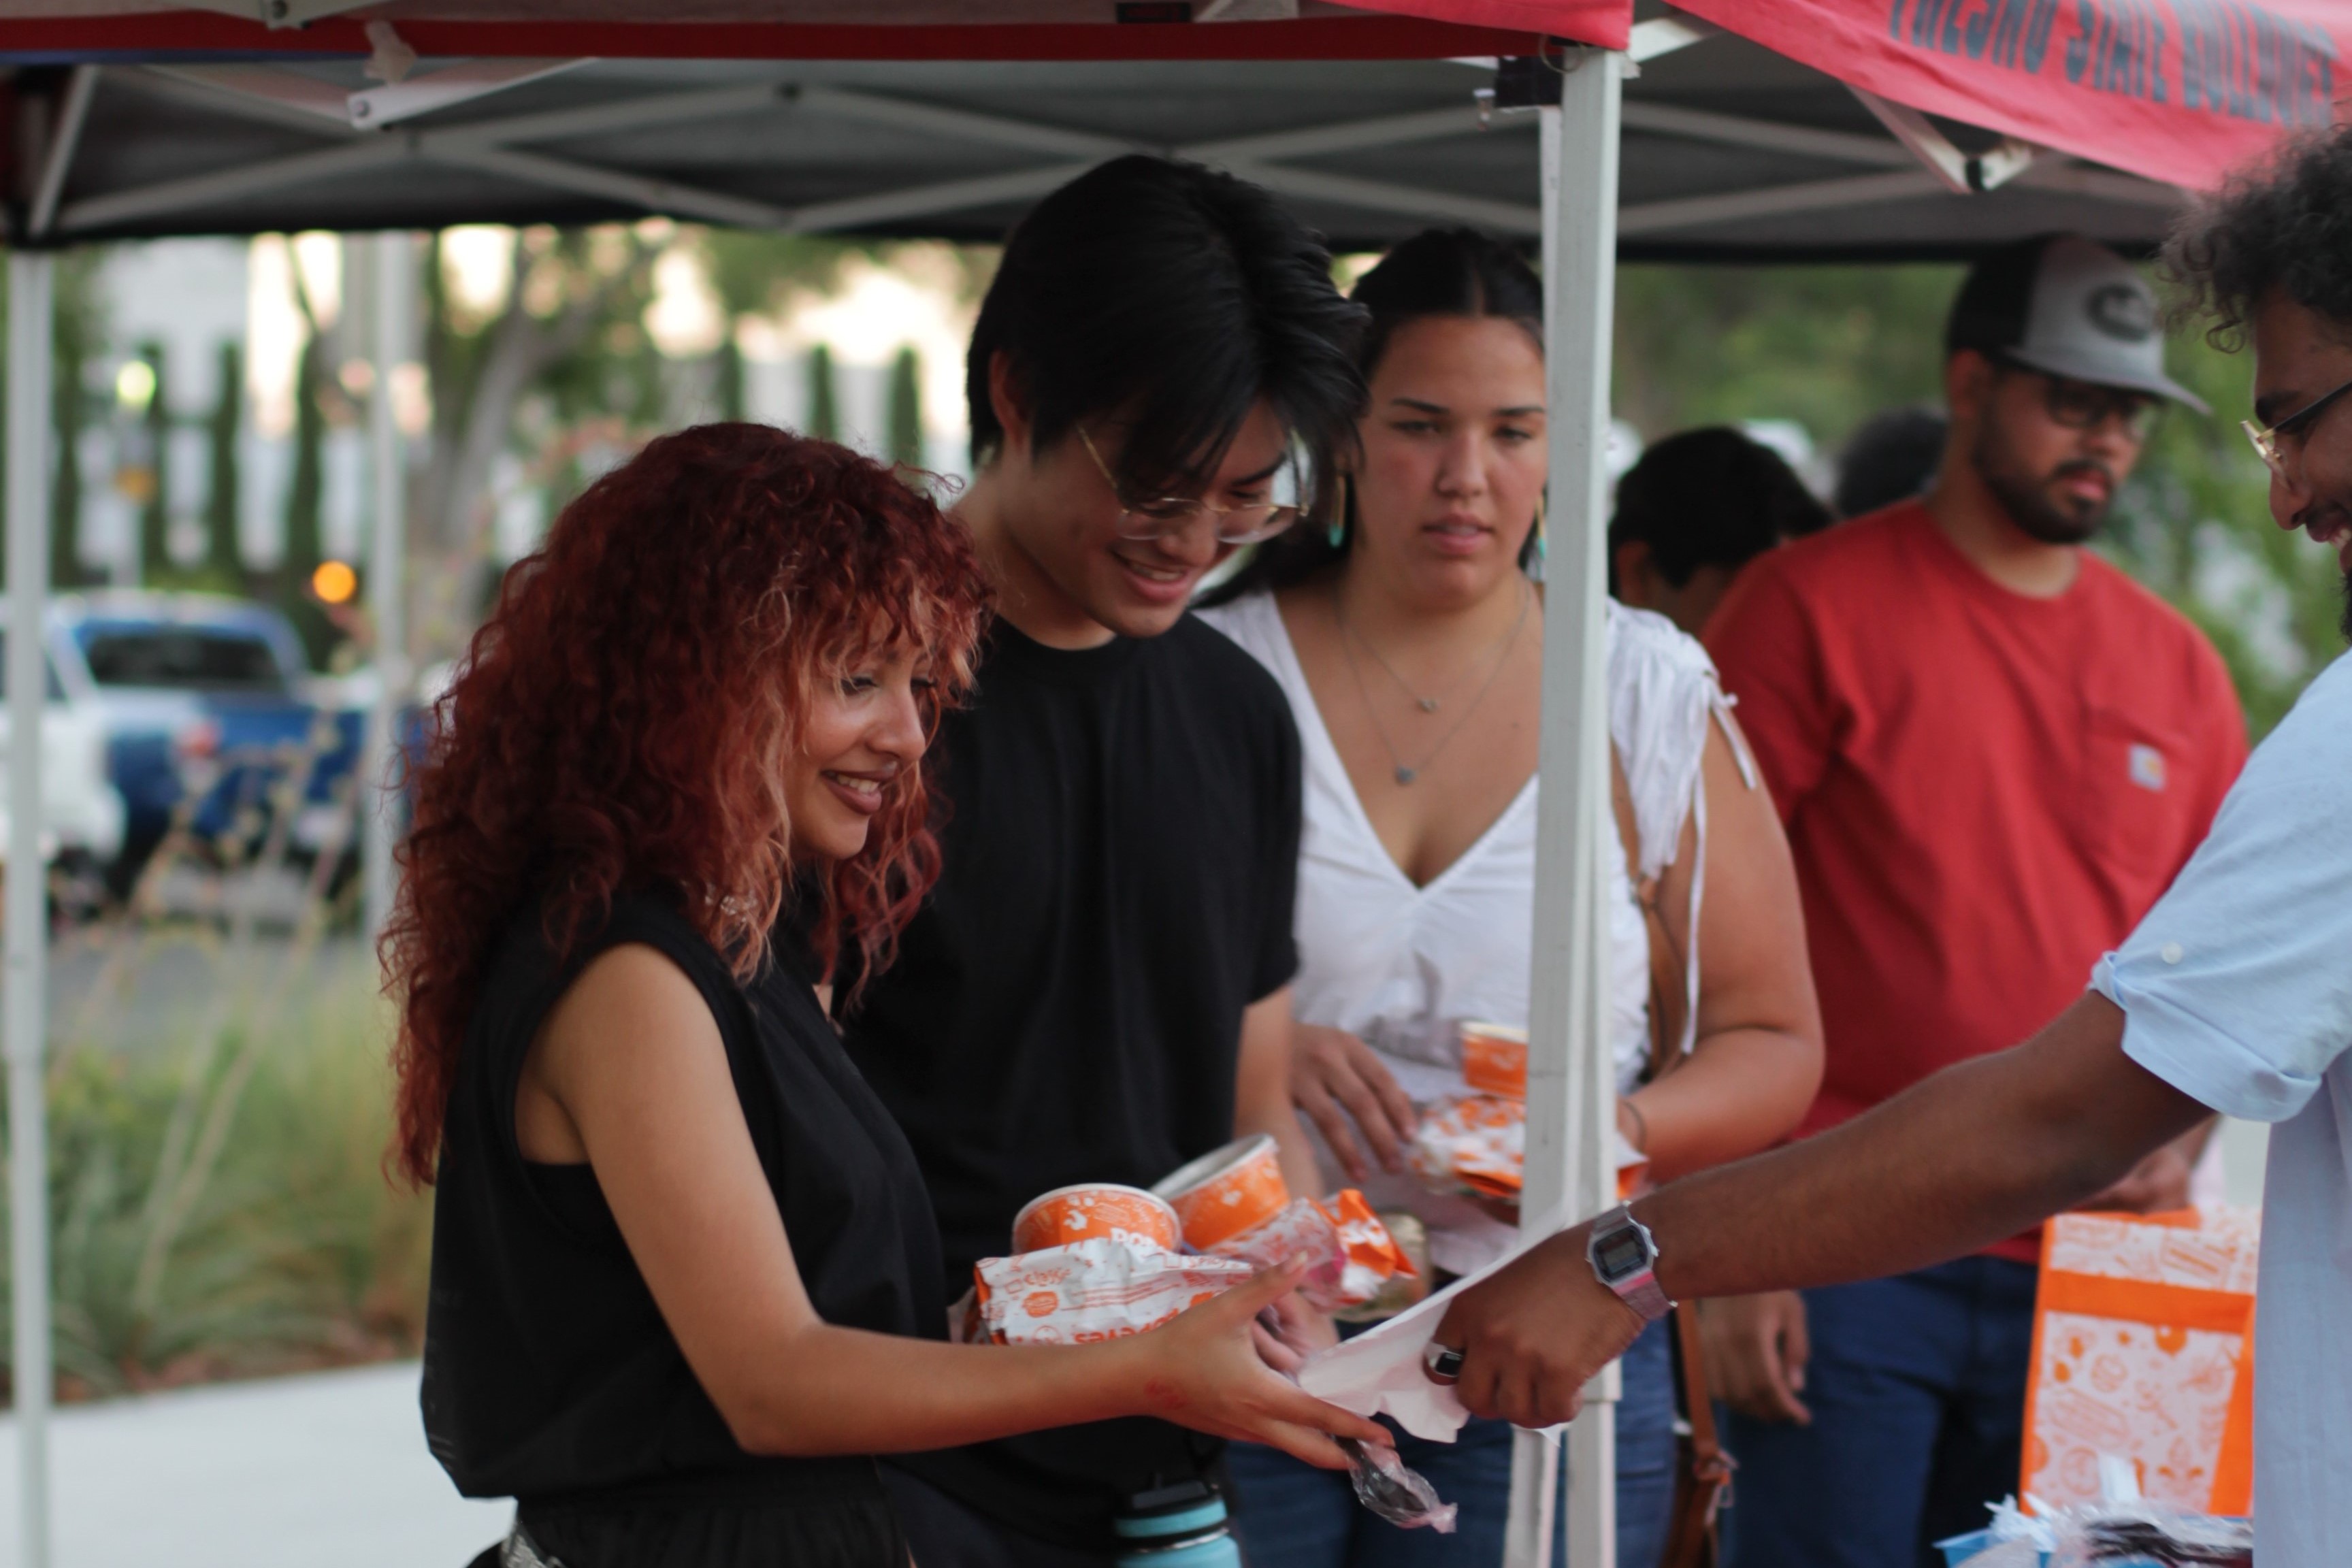 Students wait in line for Popeyes at the Sunset Picnic